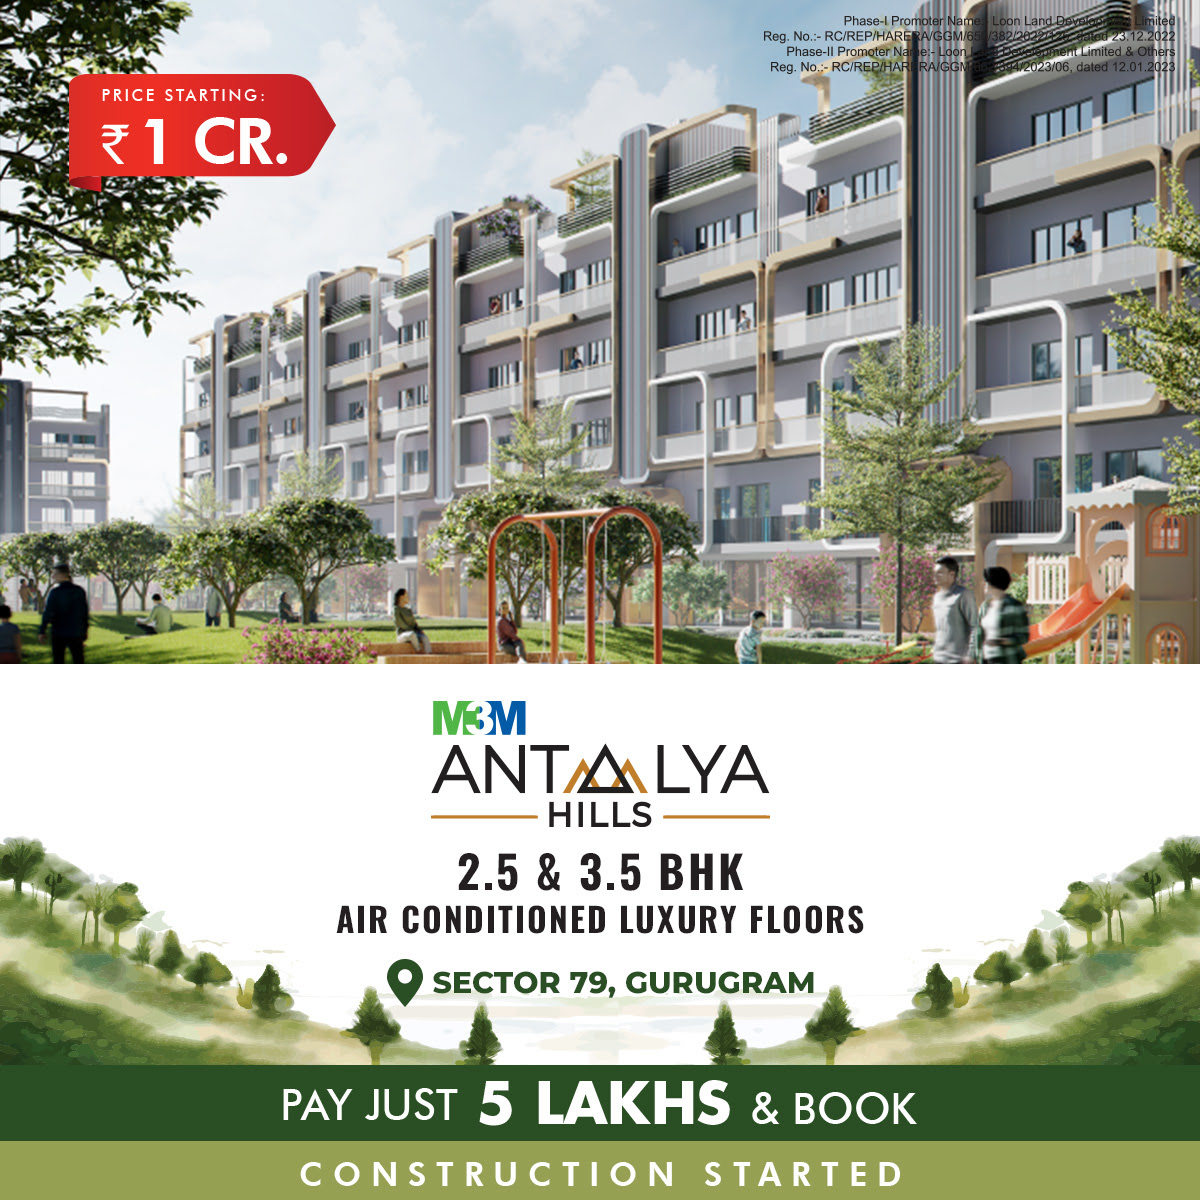 Construction started at M3M Antalya Hills in Sector 79, Gurgaon Update